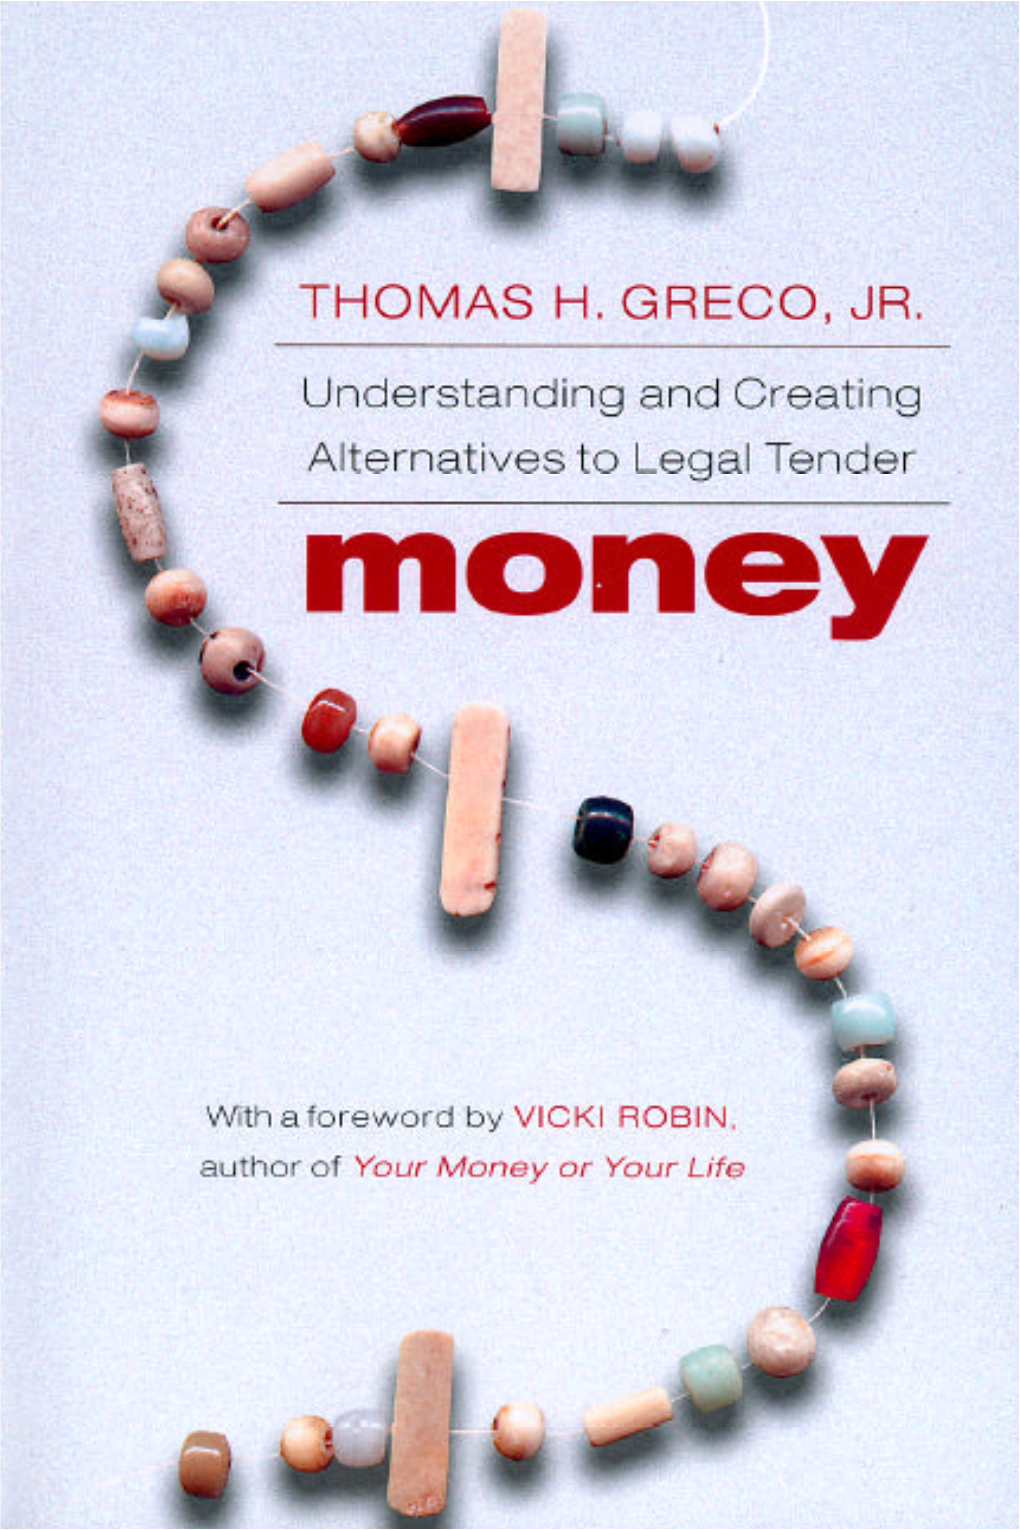 Money: Understanding and Creating Alternatives to Legal Tender